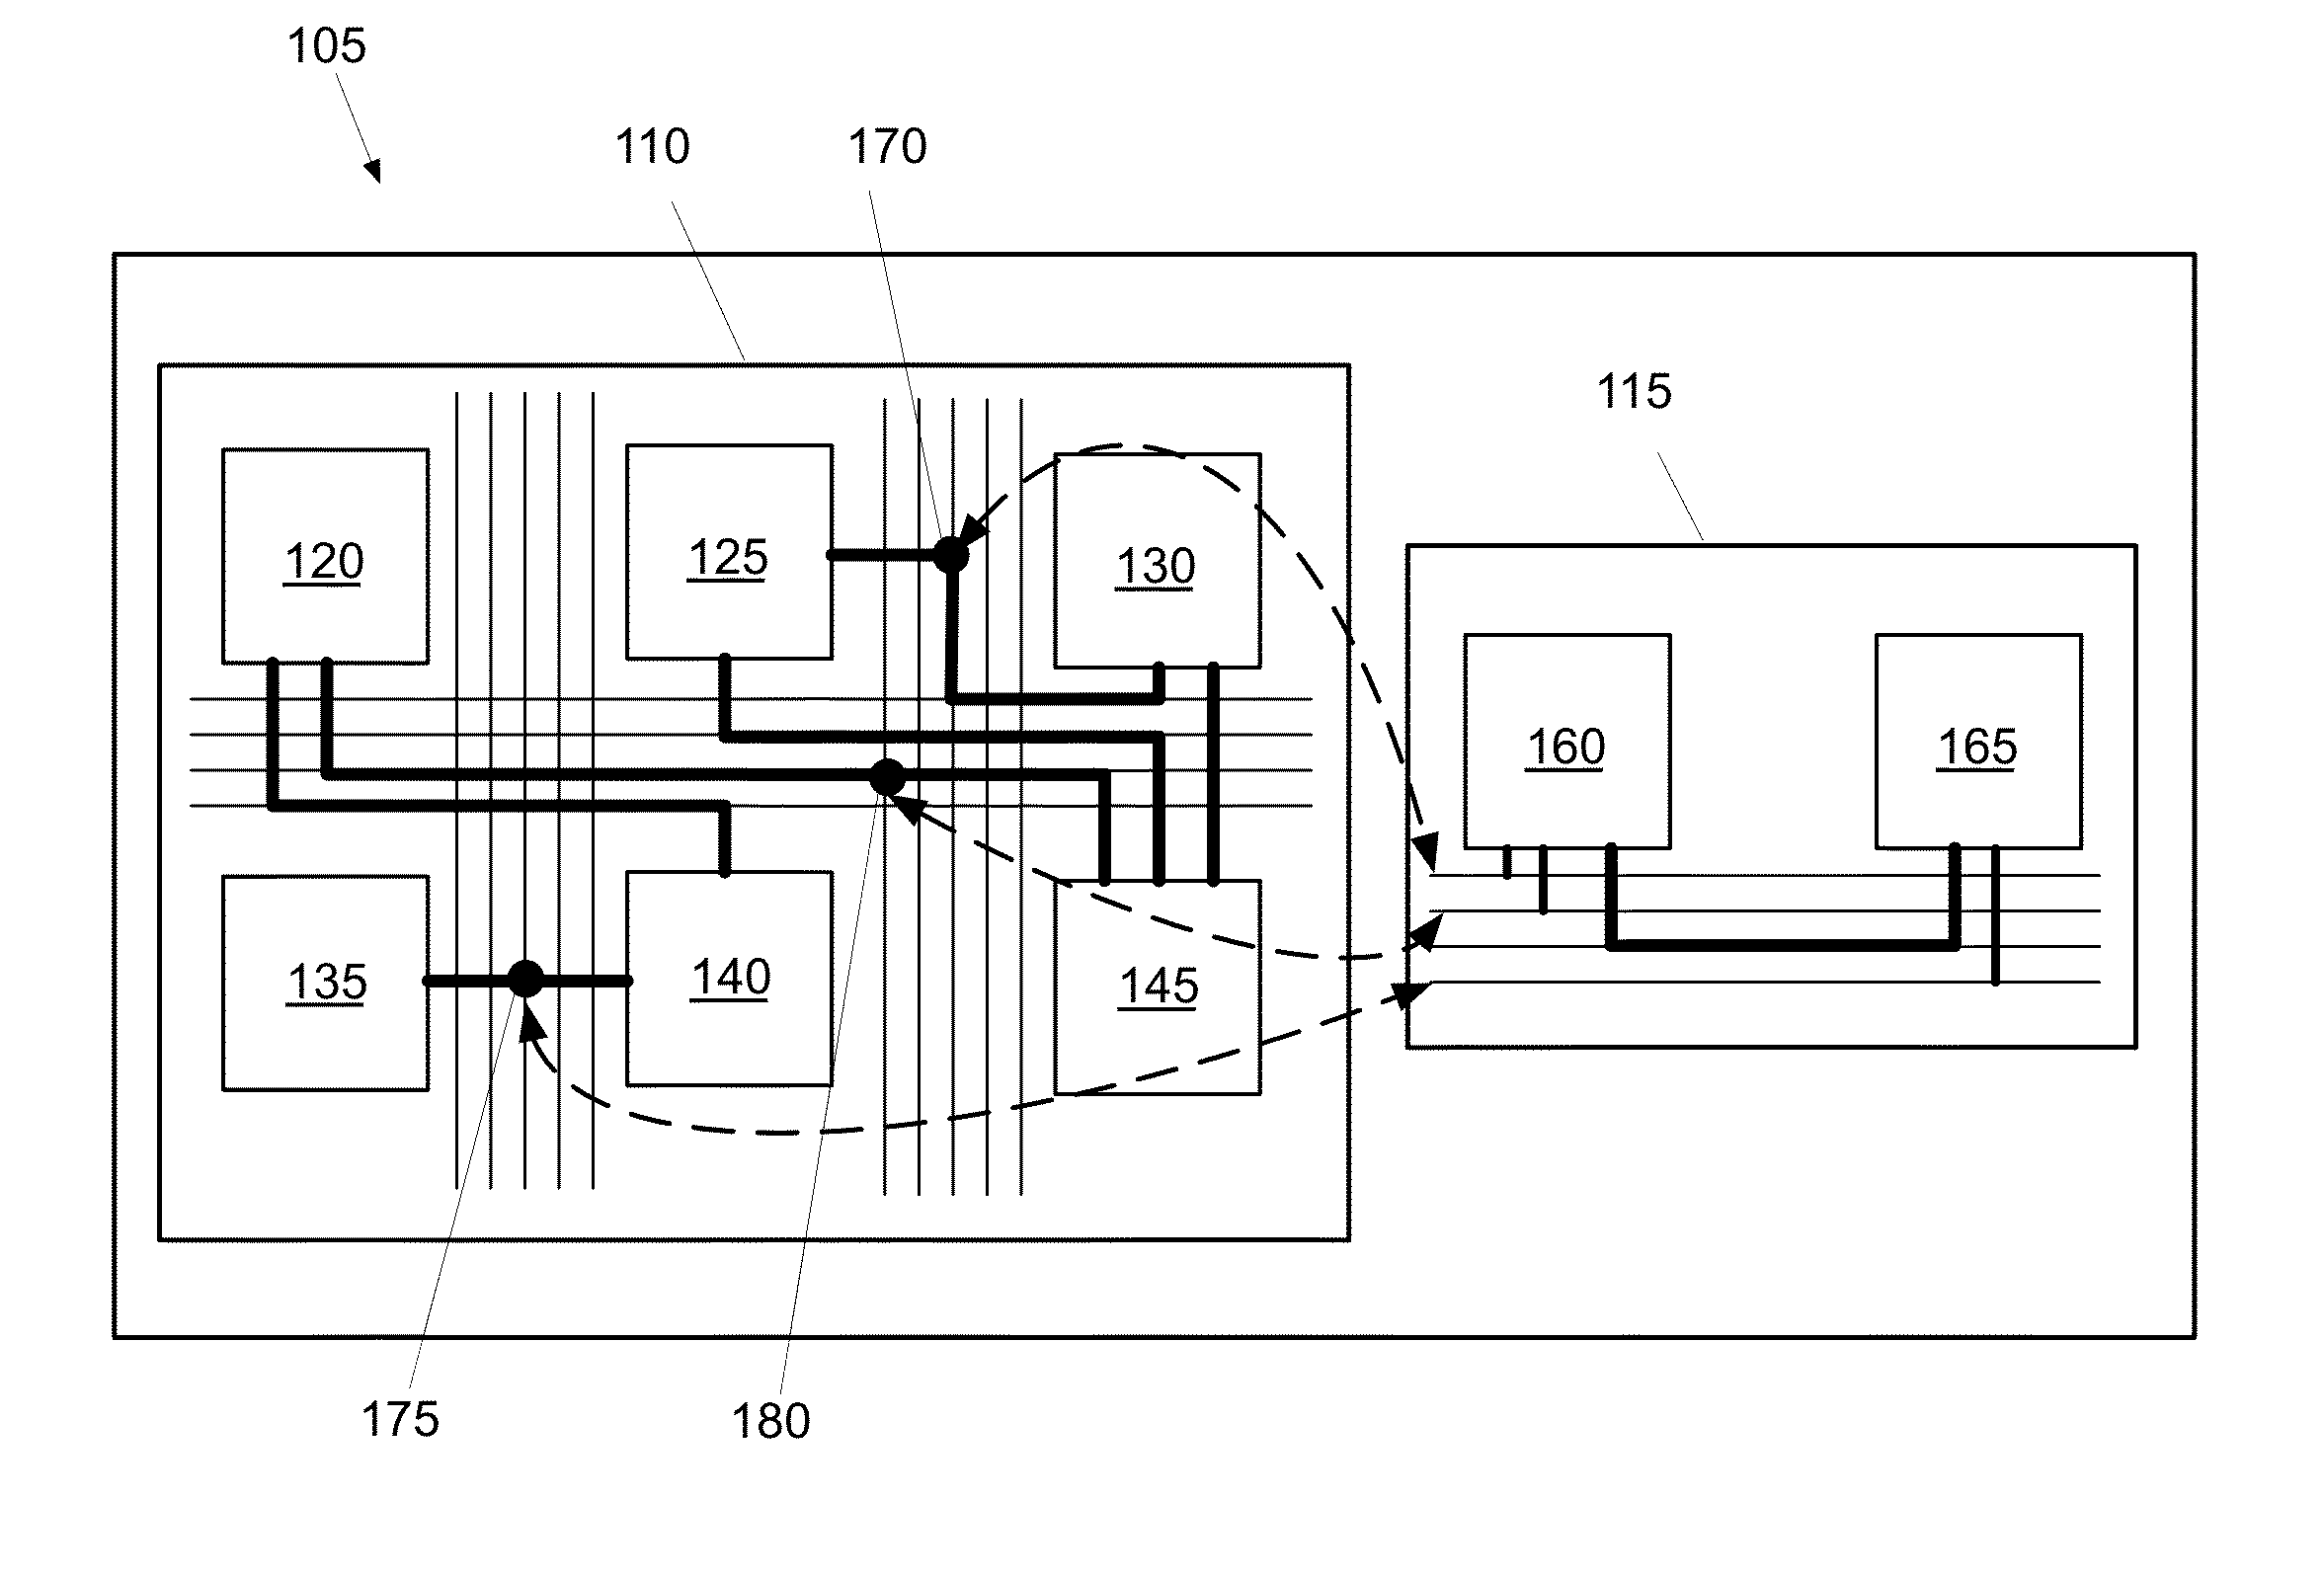 Non-intrusive monitoring and control of integrated circuits